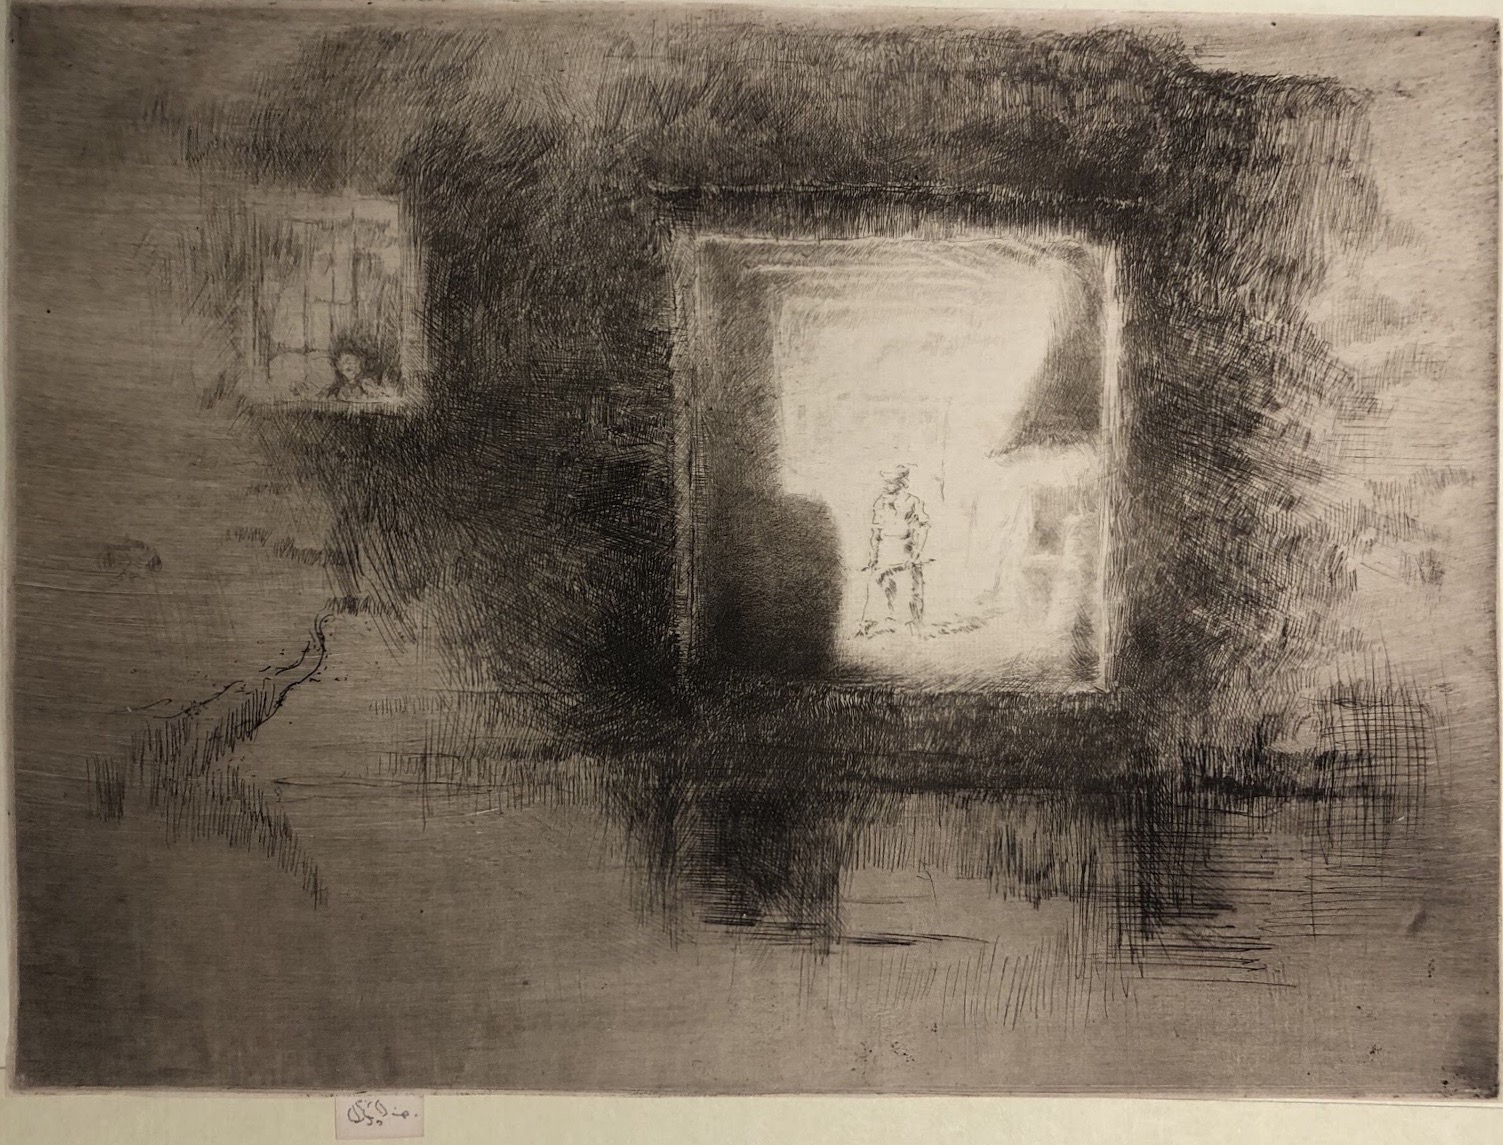 James McNeill Whistler (American, 1834–1903). Nocturne, Furnace, 1879–1880. Etching on paper. Special Collections, A. J. Rosenfeld Etchings Collection.